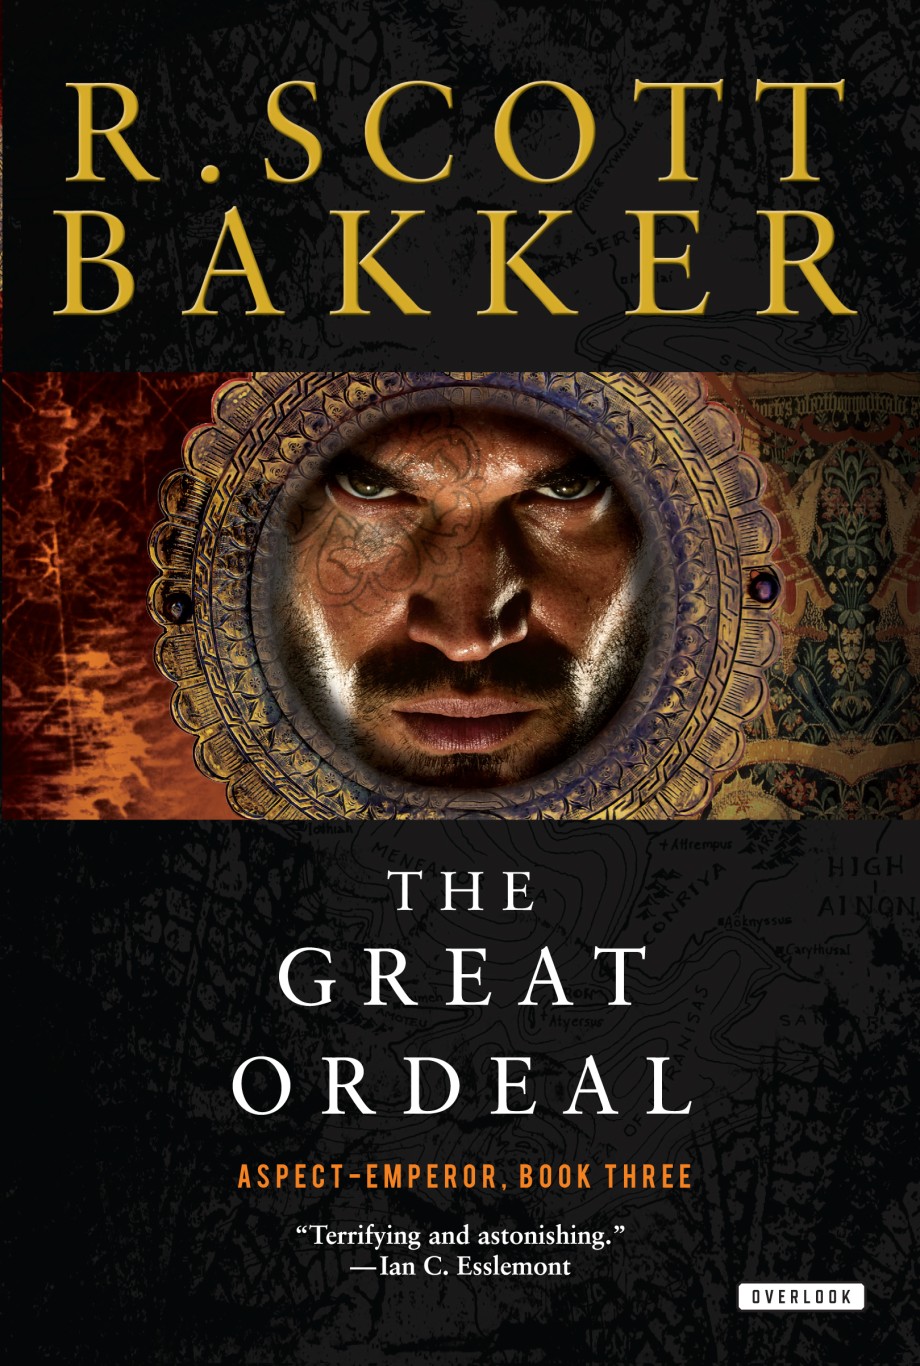 Great Ordeal The Aspect-Emperor: Book Three